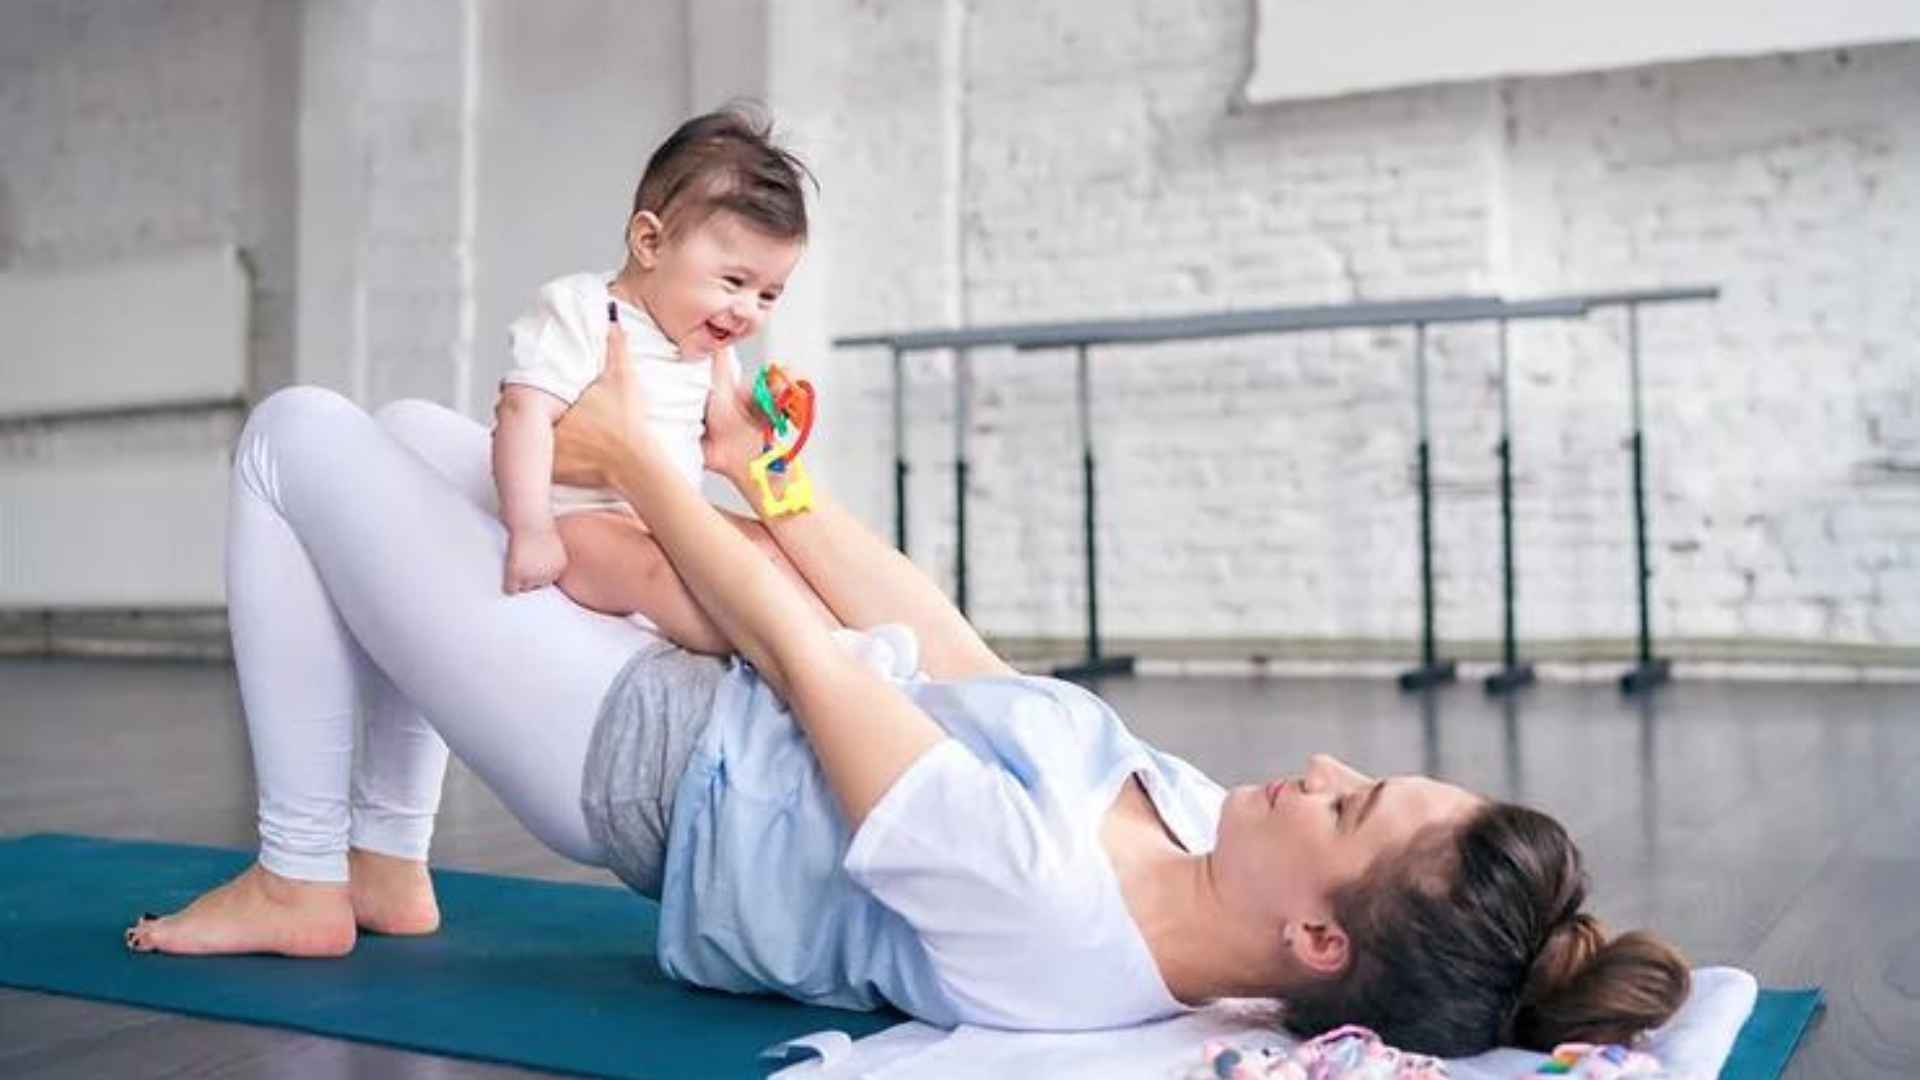 A woman doing exercises using a baby as a weight